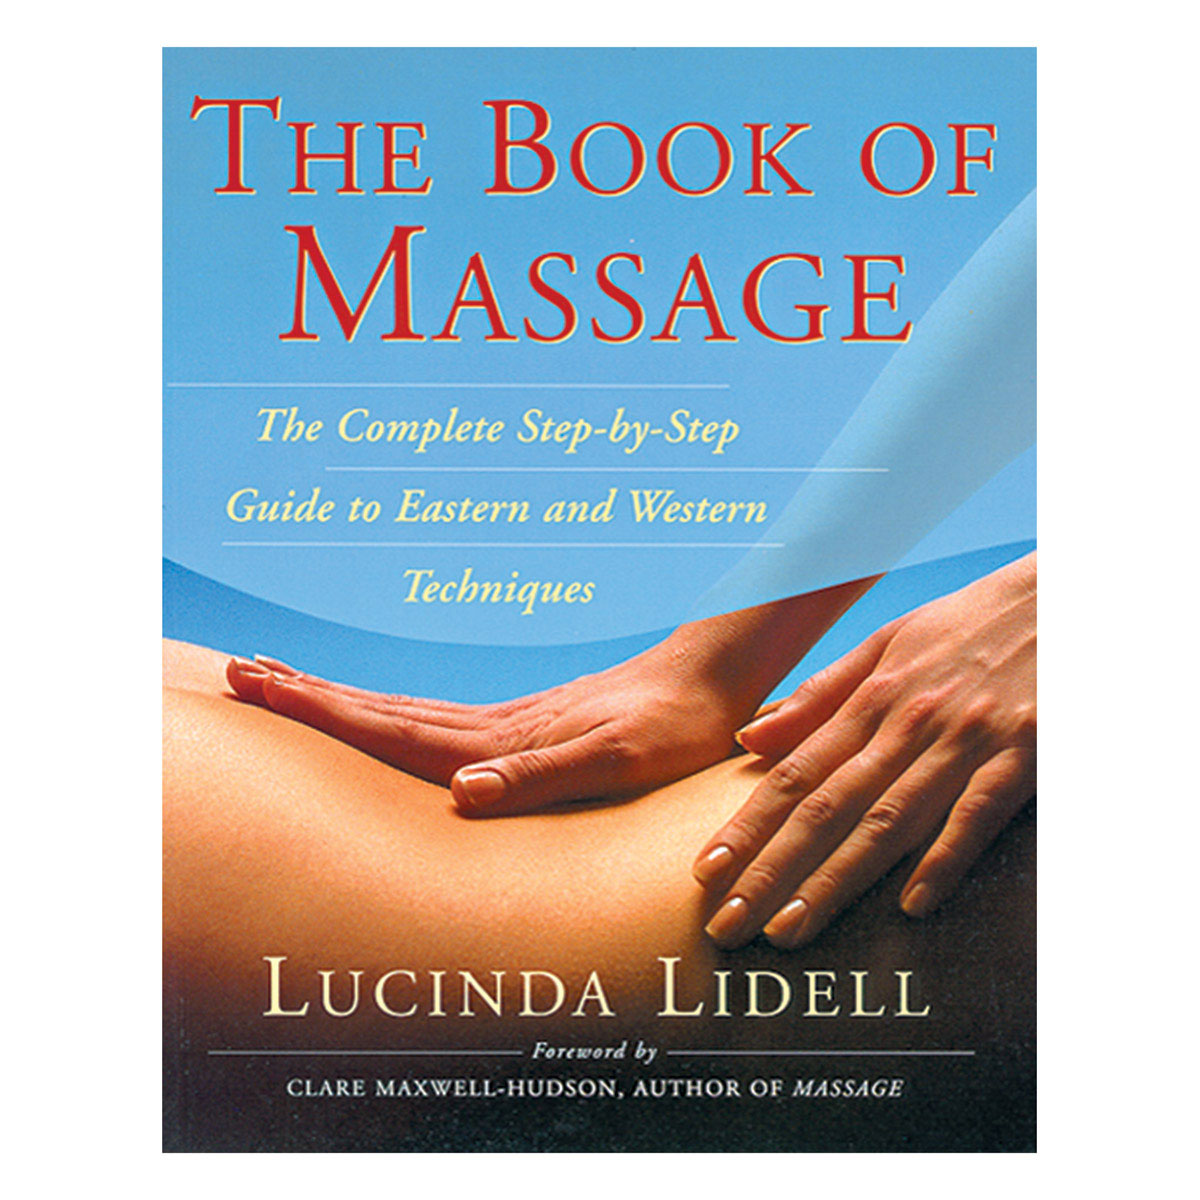 Book of Massage - The Complete Step-by-Step Guide to Eastern and Western Techniques - Fireside